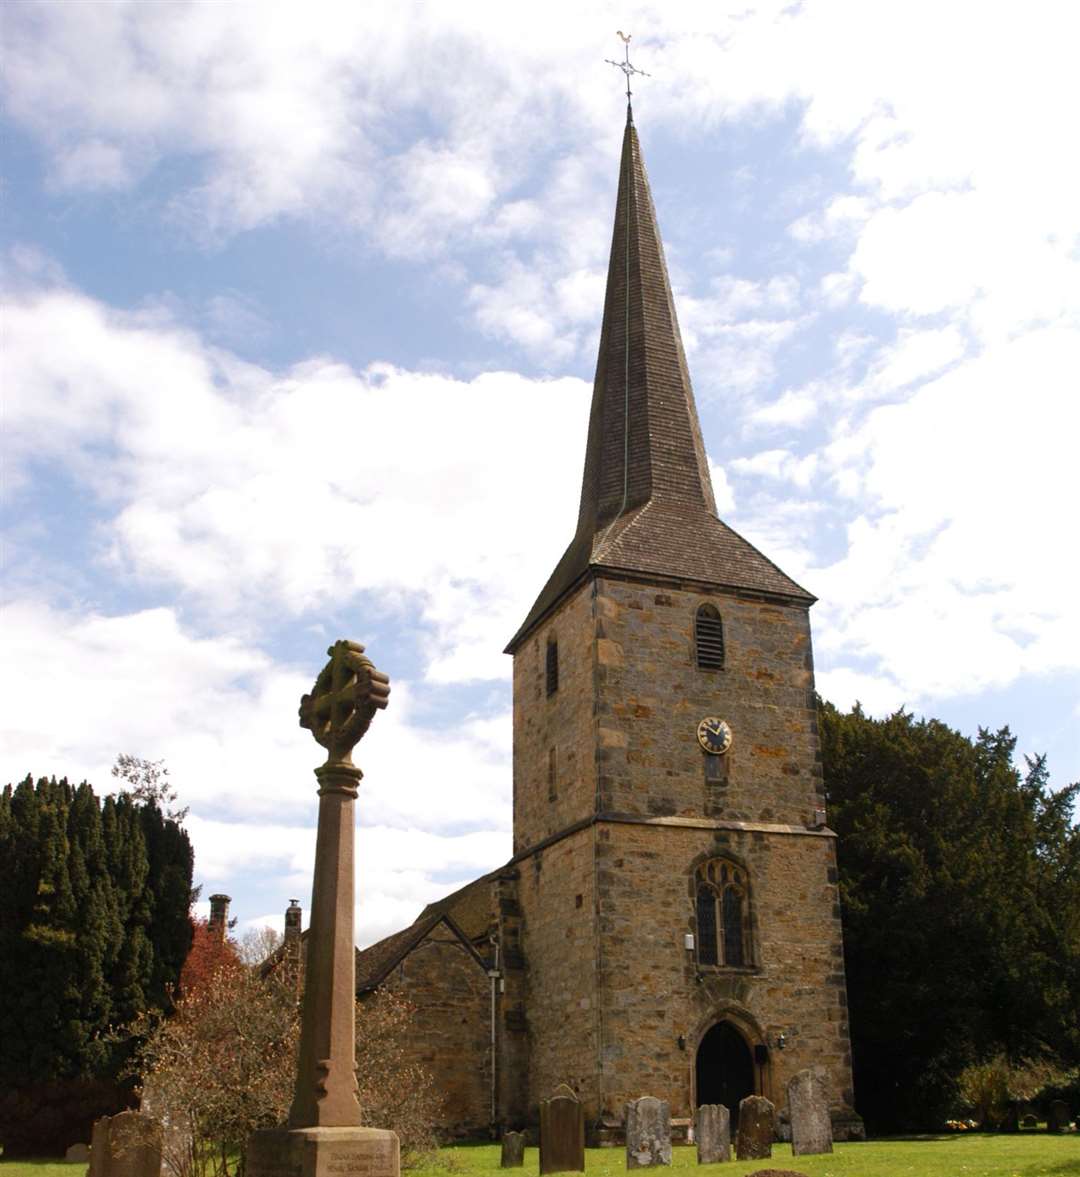 St Peter's Church at Hever - one of three spires